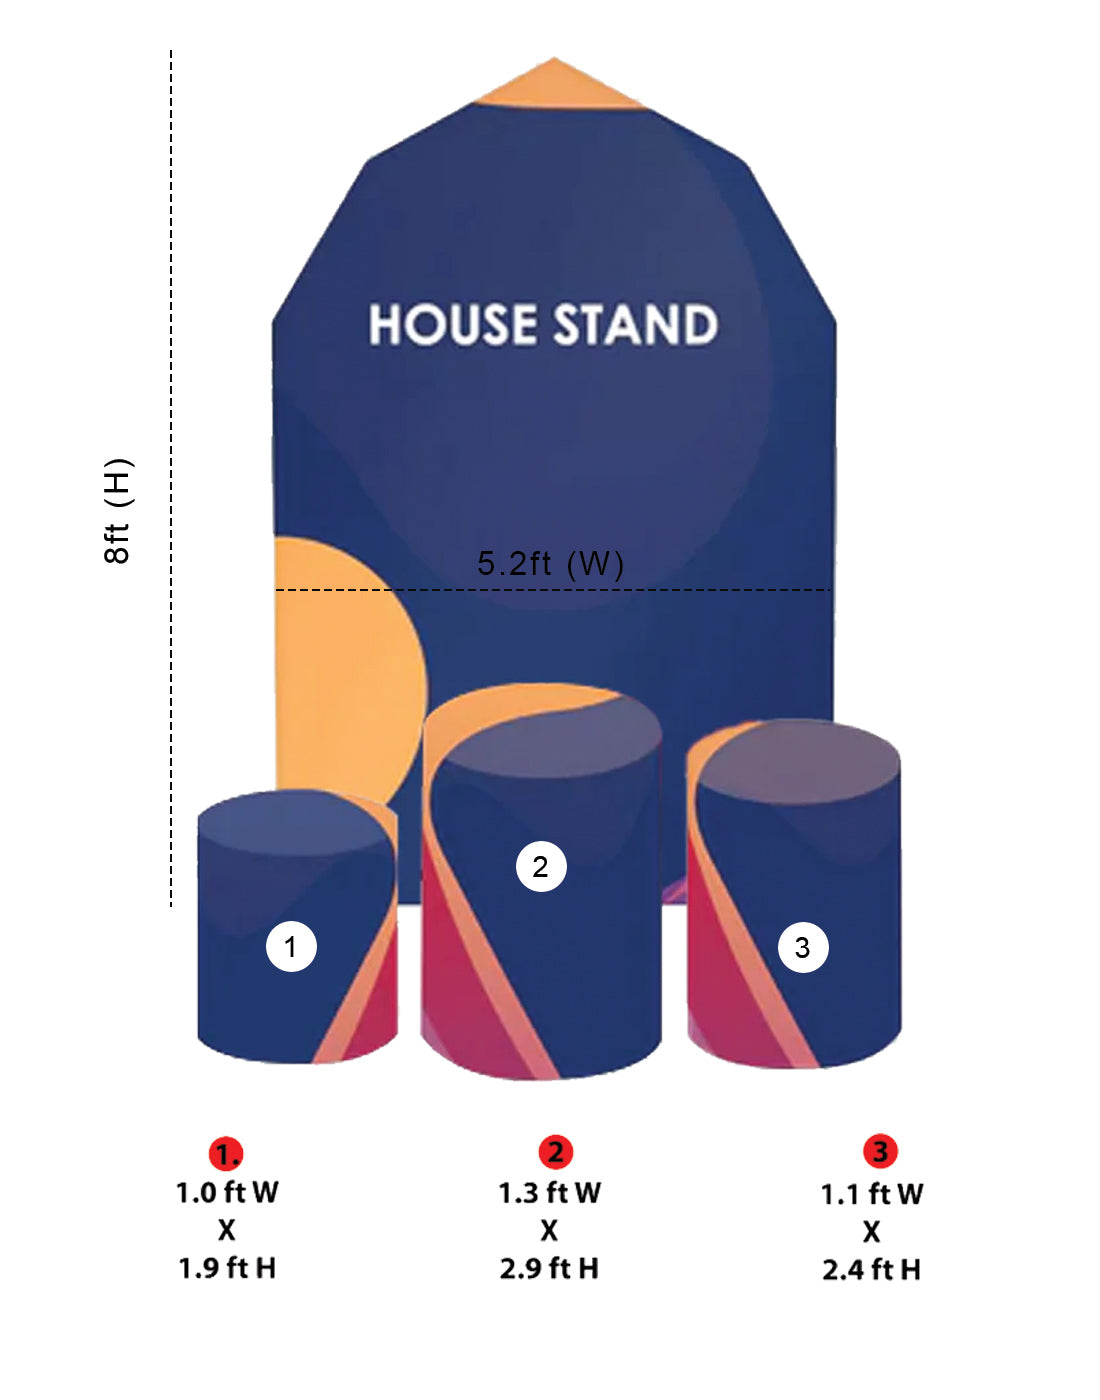 House Stand with Plinth - Backdropsource